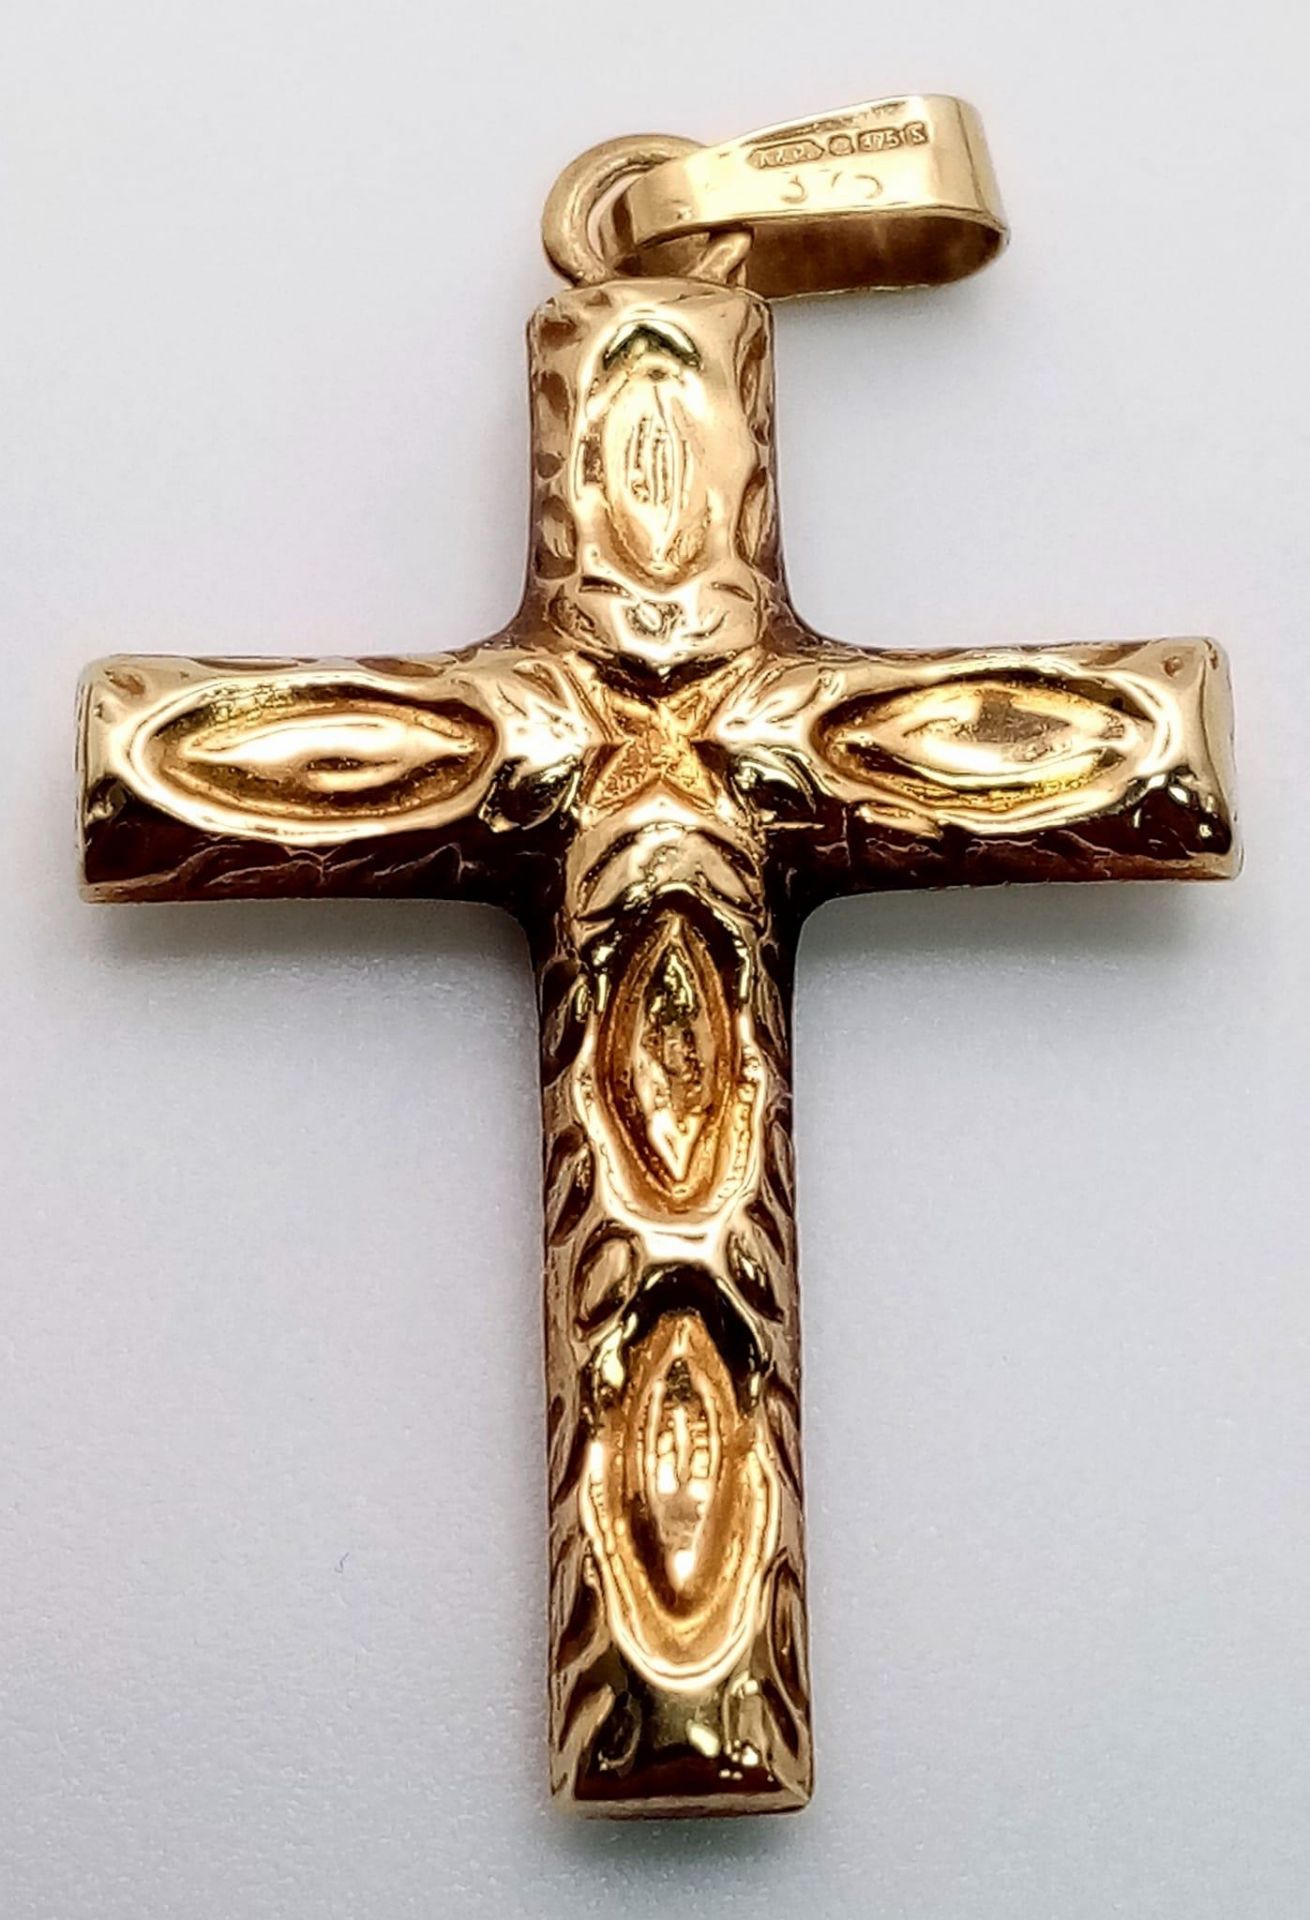 An attractive 9k yellow gold detailed cross pendant, weight 1.1g - Image 2 of 3